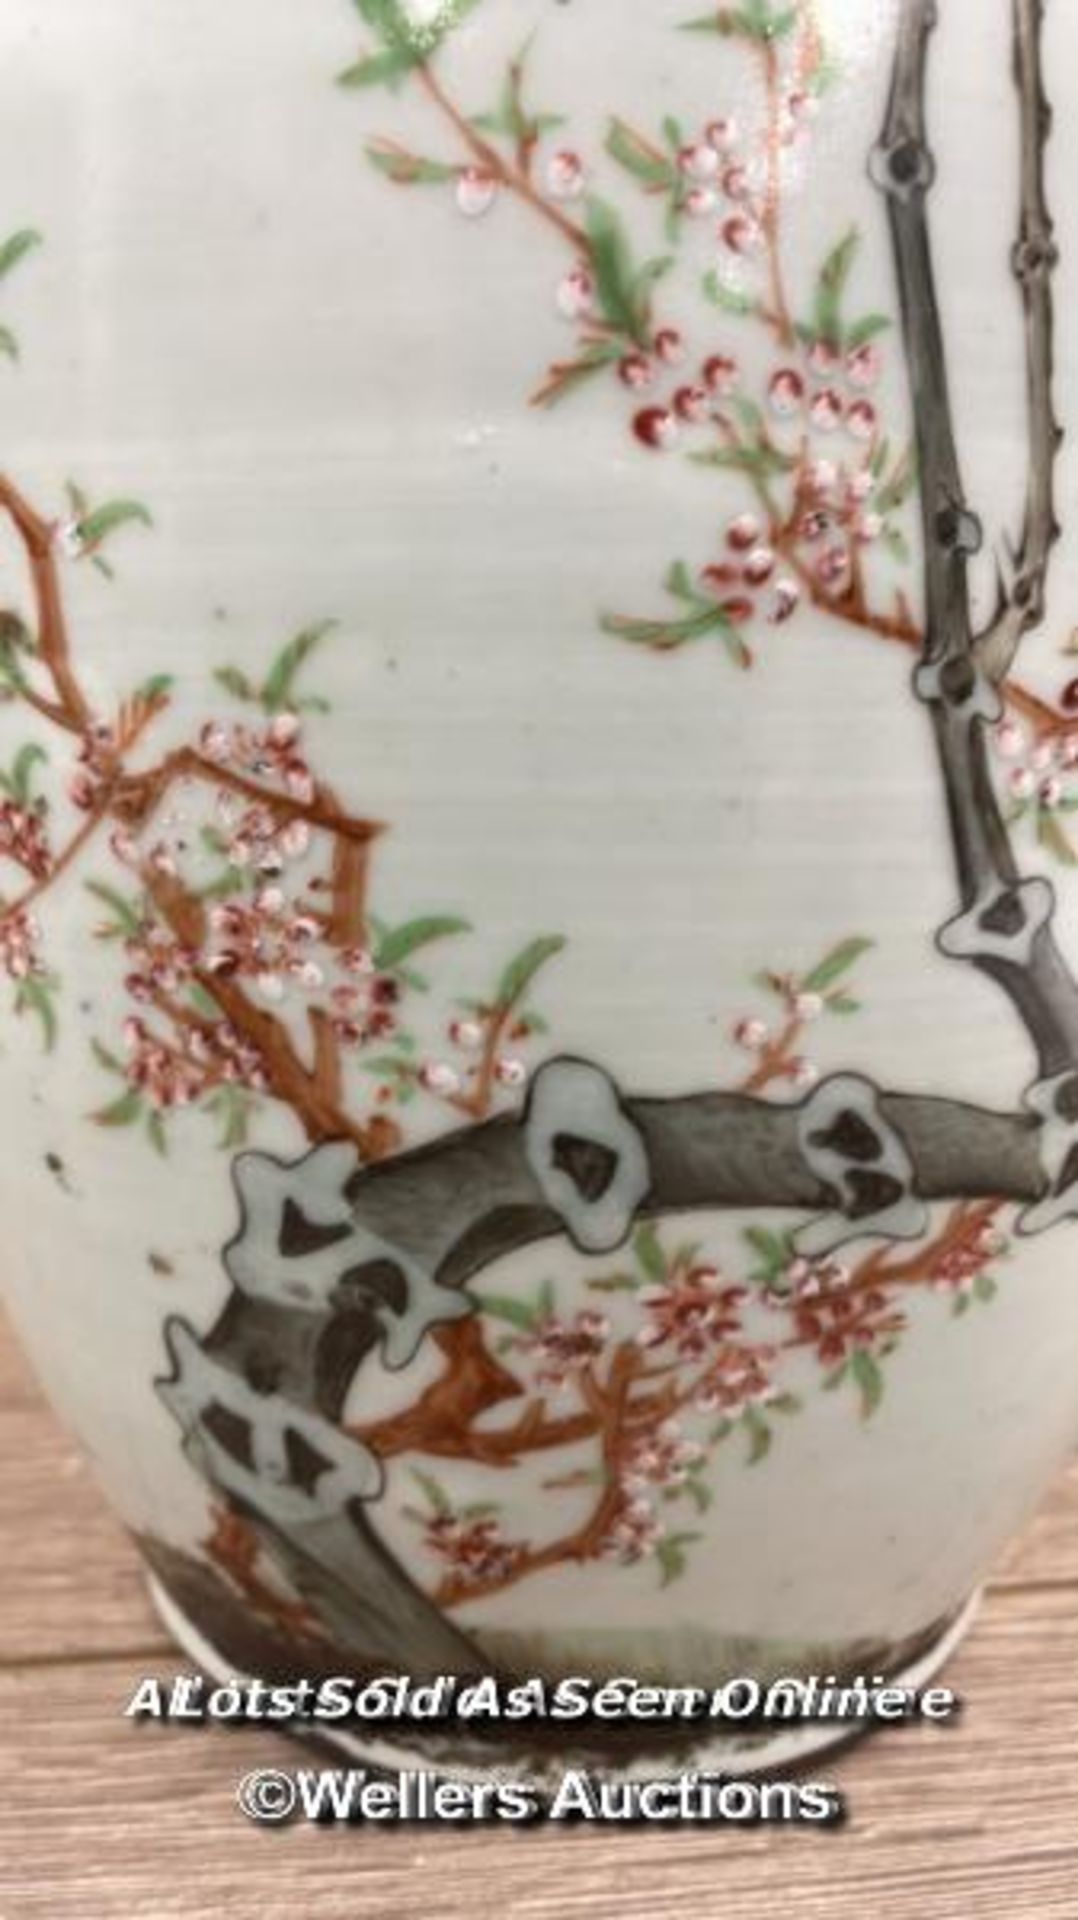 A LARGE JAPANESE VASE DECORATED WITH DETAILED BIRDS AND FLOWERS, DAMAGE TO ONE OF THE FINIALS. - Image 5 of 16